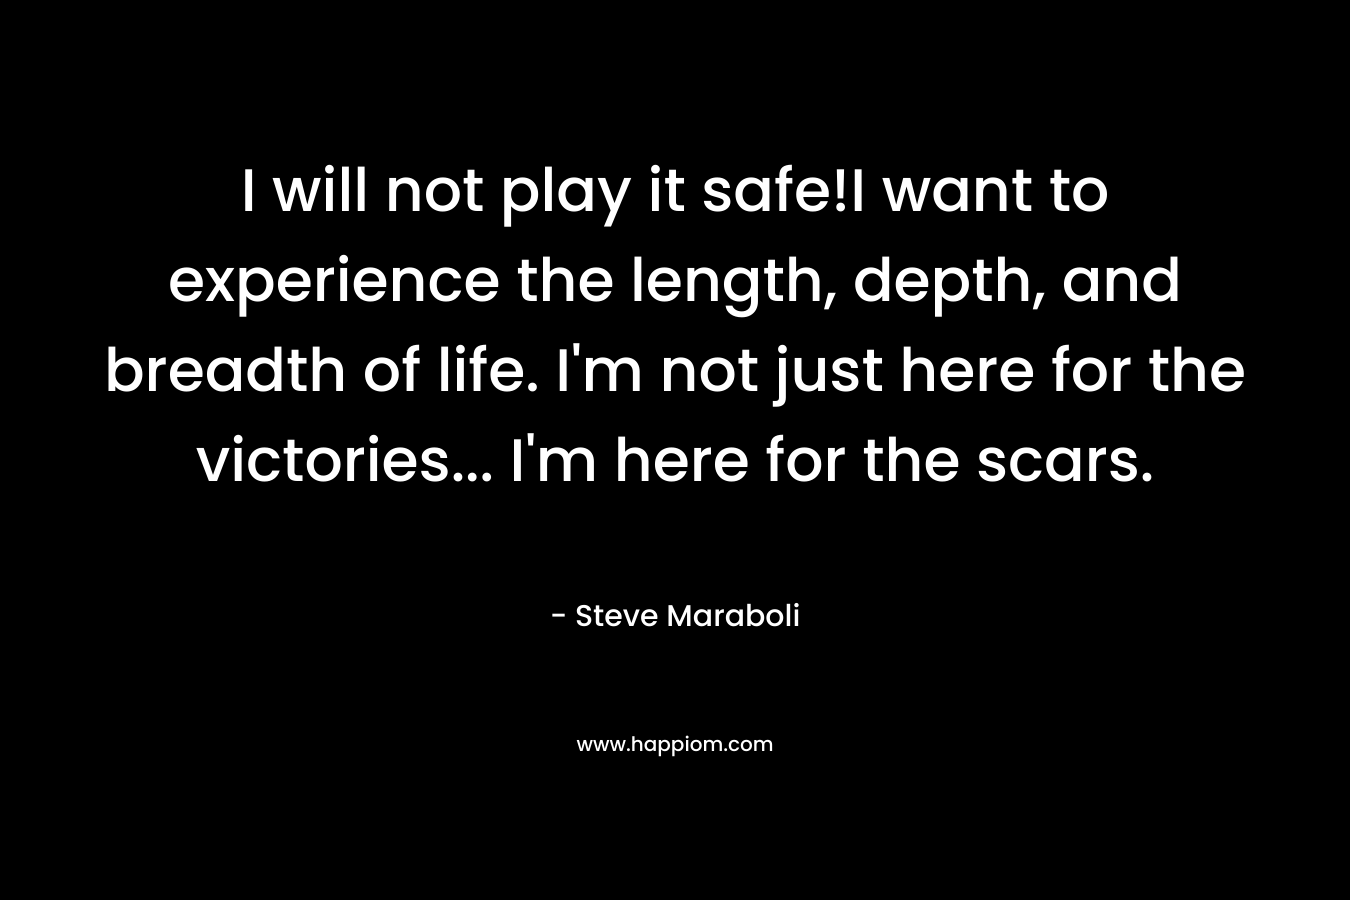 I will not play it safe!I want to experience the length, depth, and breadth of life. I'm not just here for the victories... I'm here for the scars.